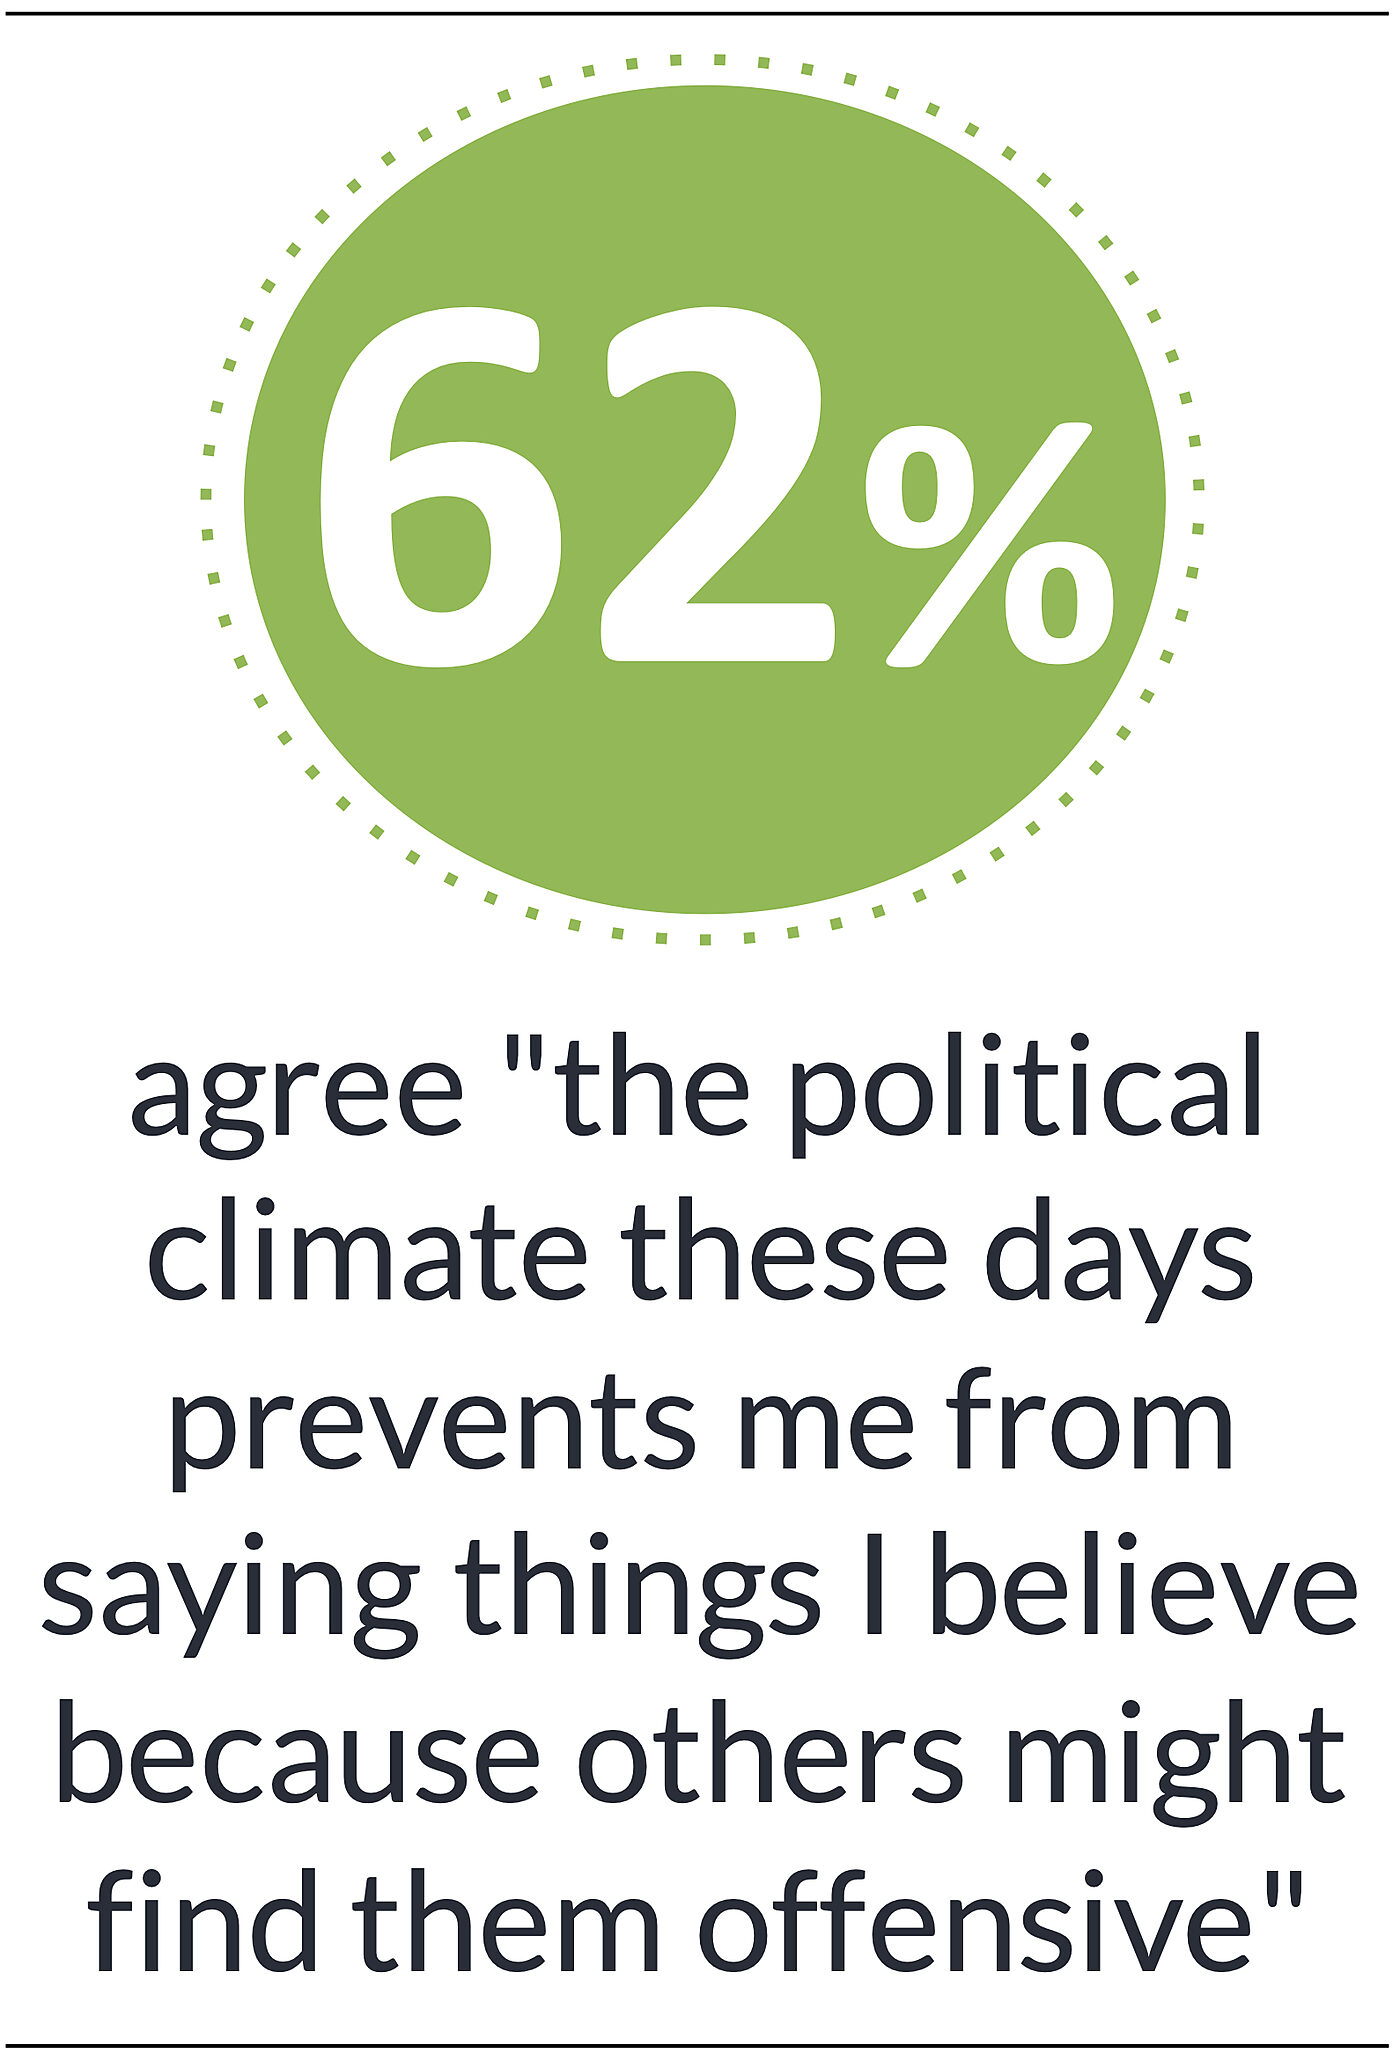 62% agree "the political climate these days prevents me from saying things I believe because others might find them offensive"